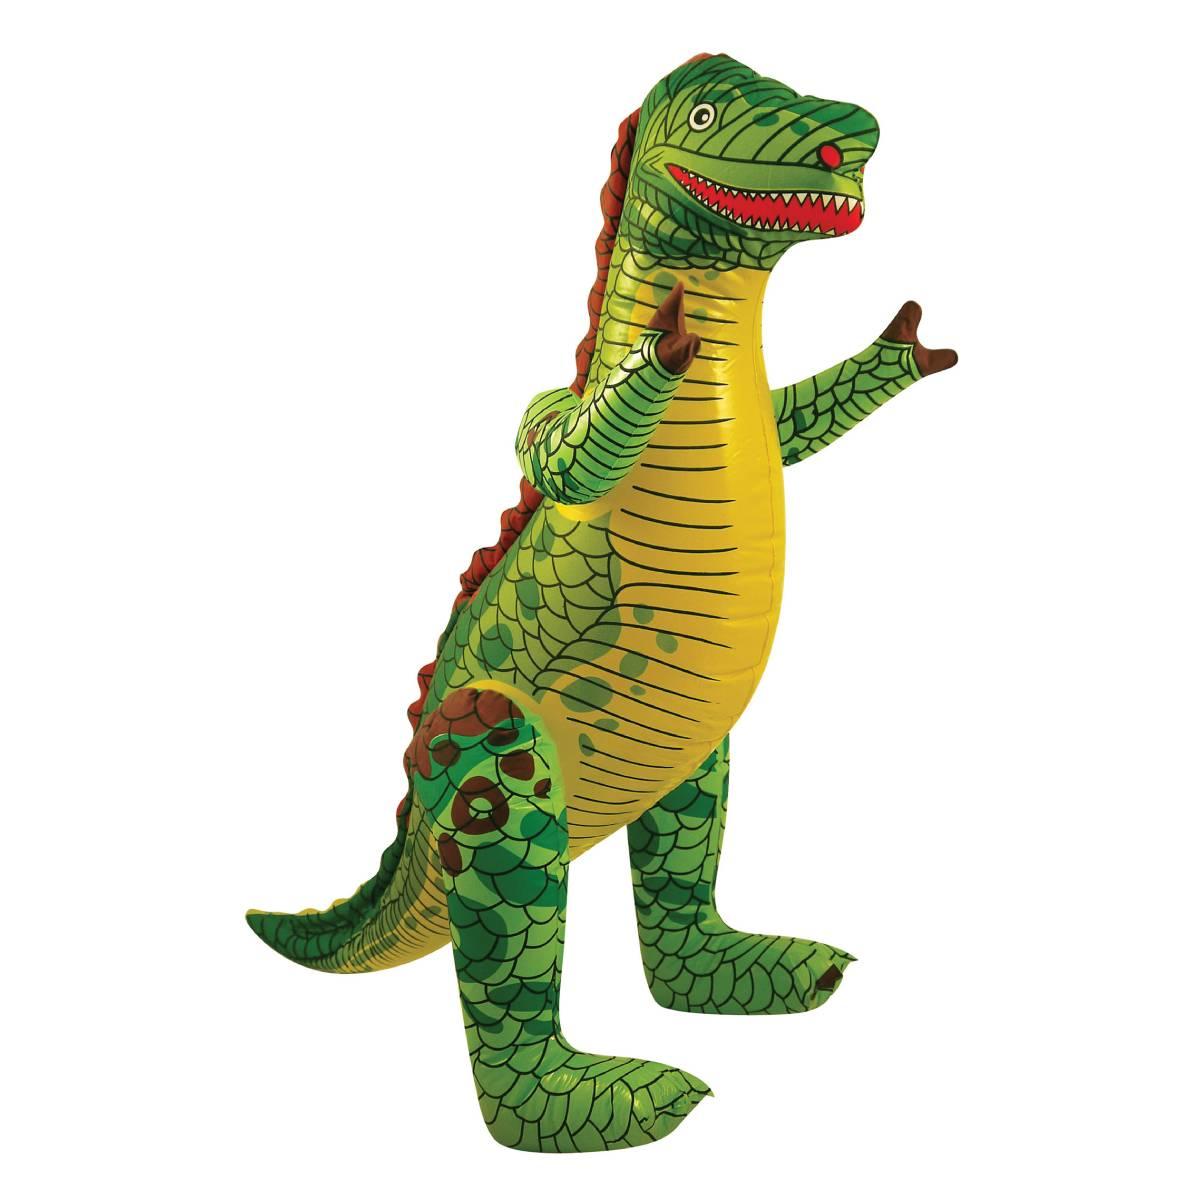 Inflatable Dinosaur 76cm tall IJ054 available here at Karnival Costumes online party shop